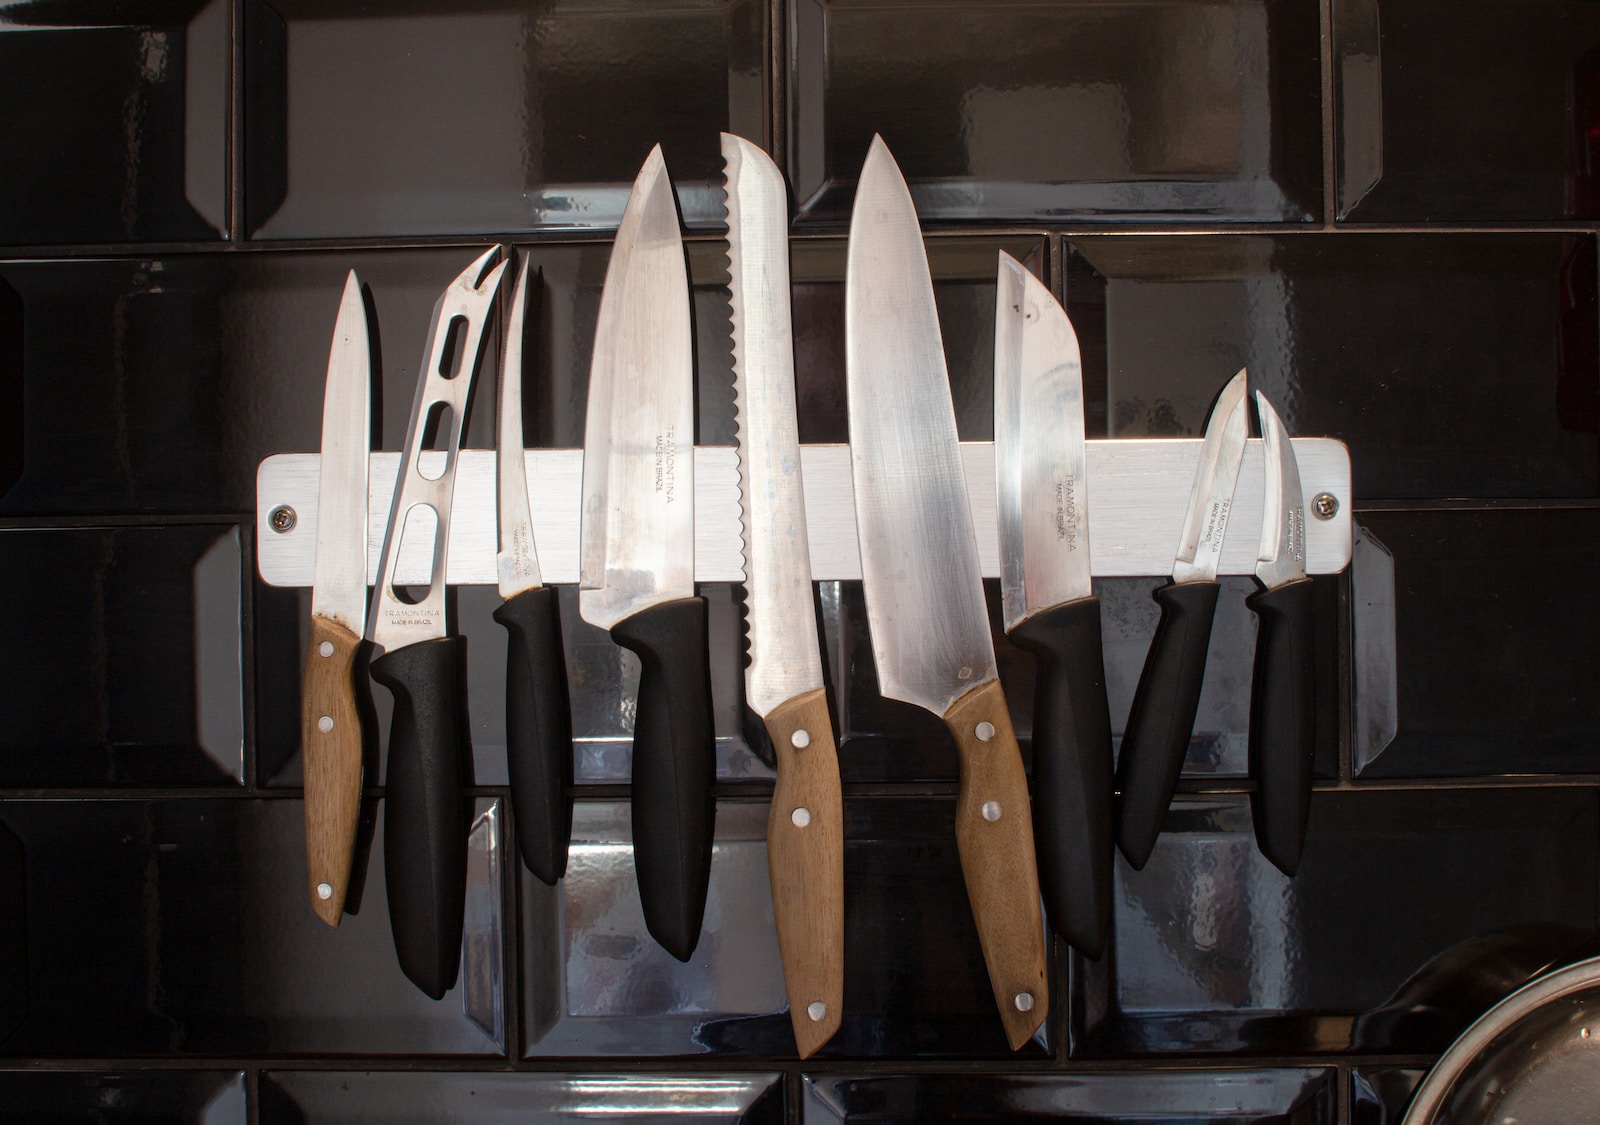 The Best Knives and Shears for Butchering Chickens – Our Top Recommendations.